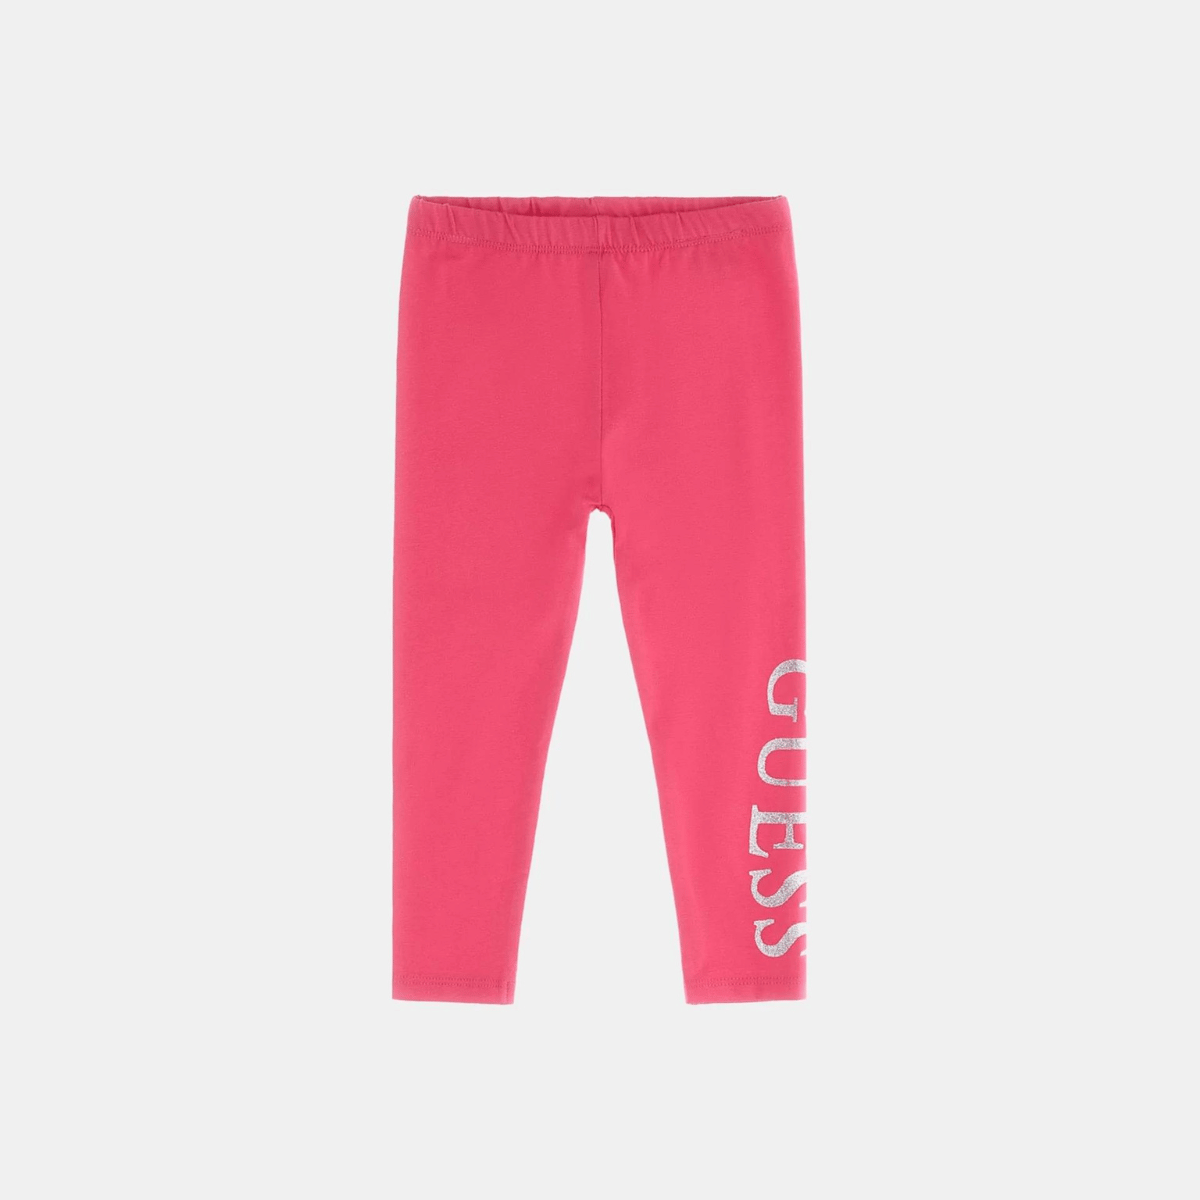 Guess pink girls leggings with large silver logo 2